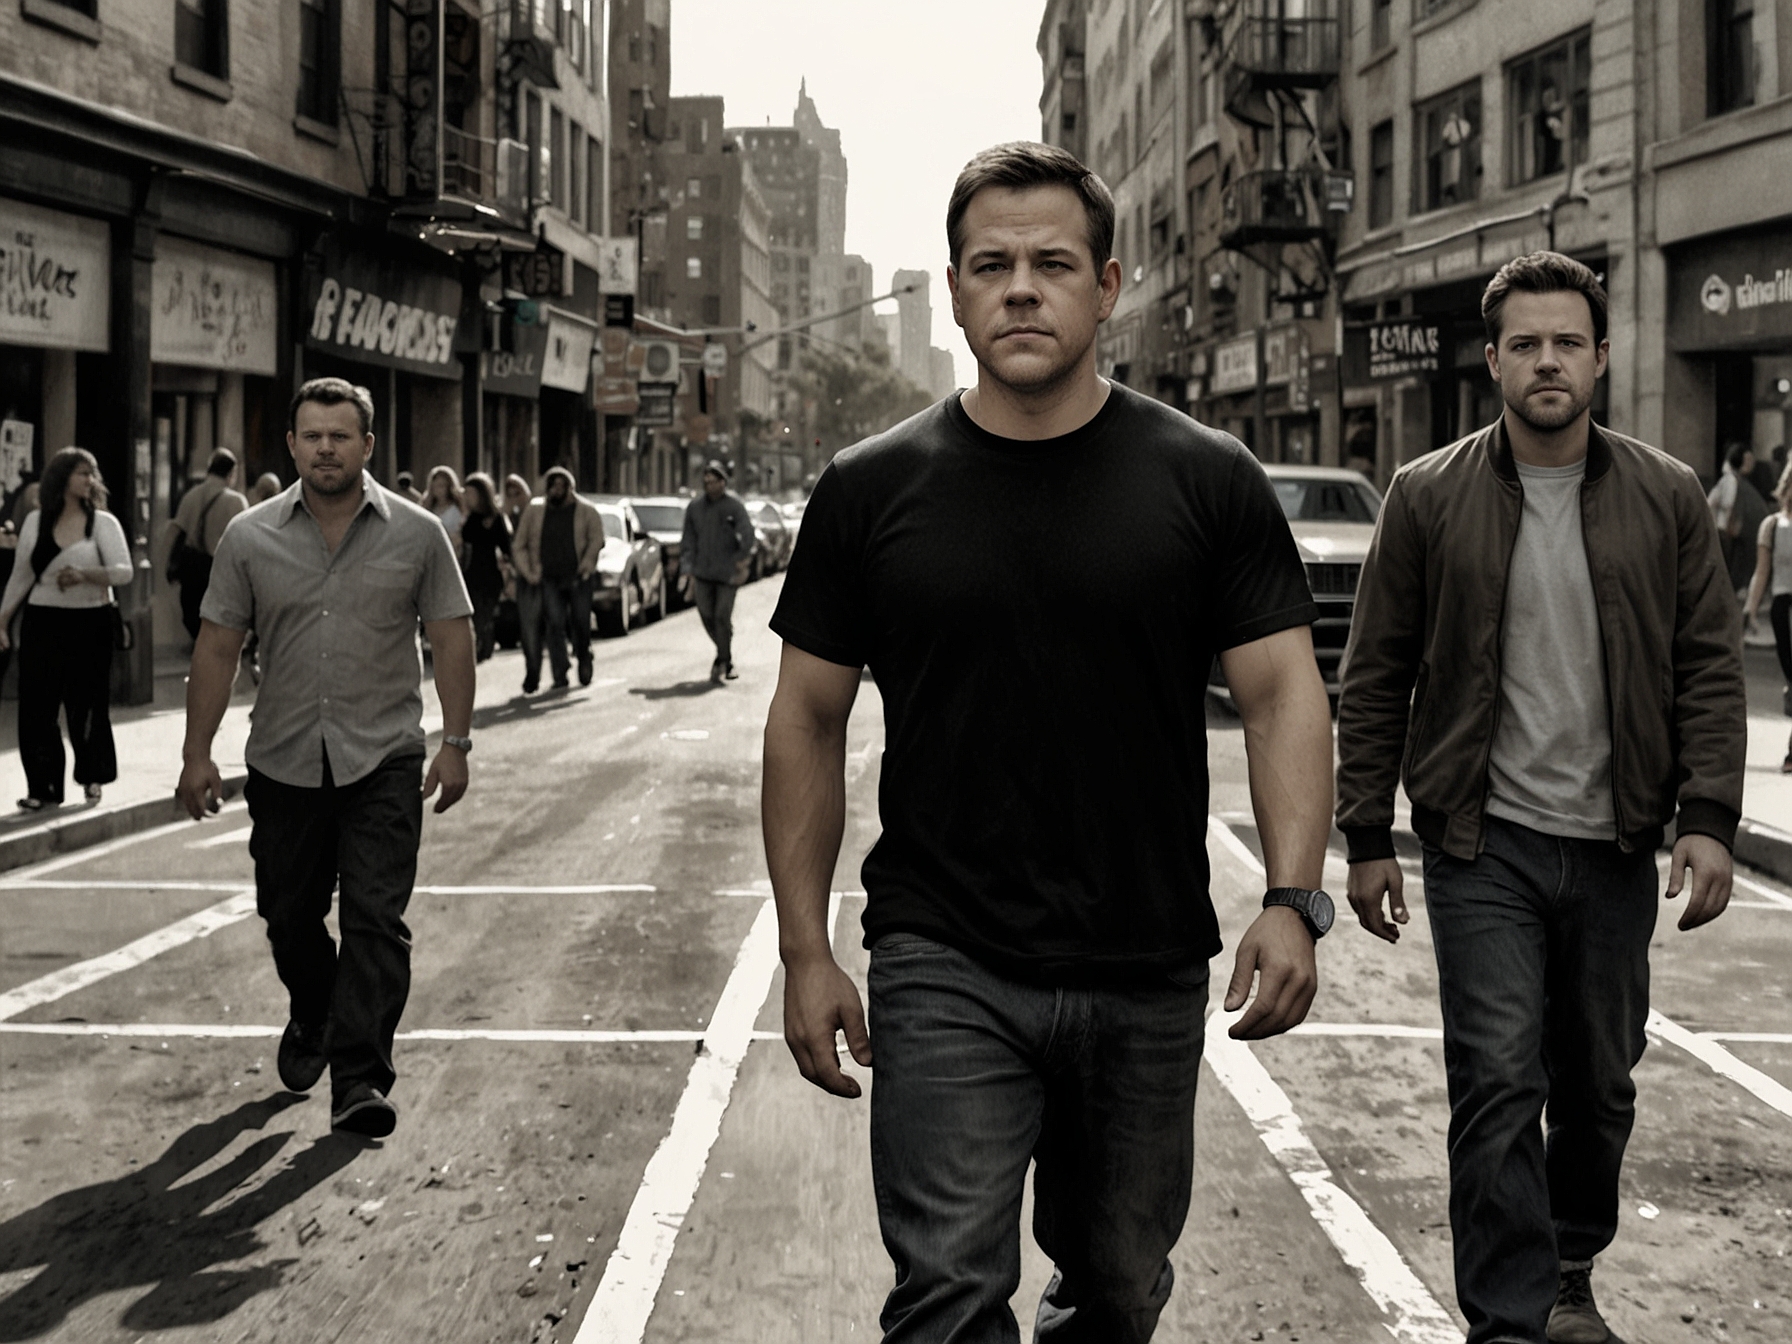 Matt Damon and Ben Affleck are seen walking together on a busy street, symbolizing their years of friendship and support through various phases of their lives.